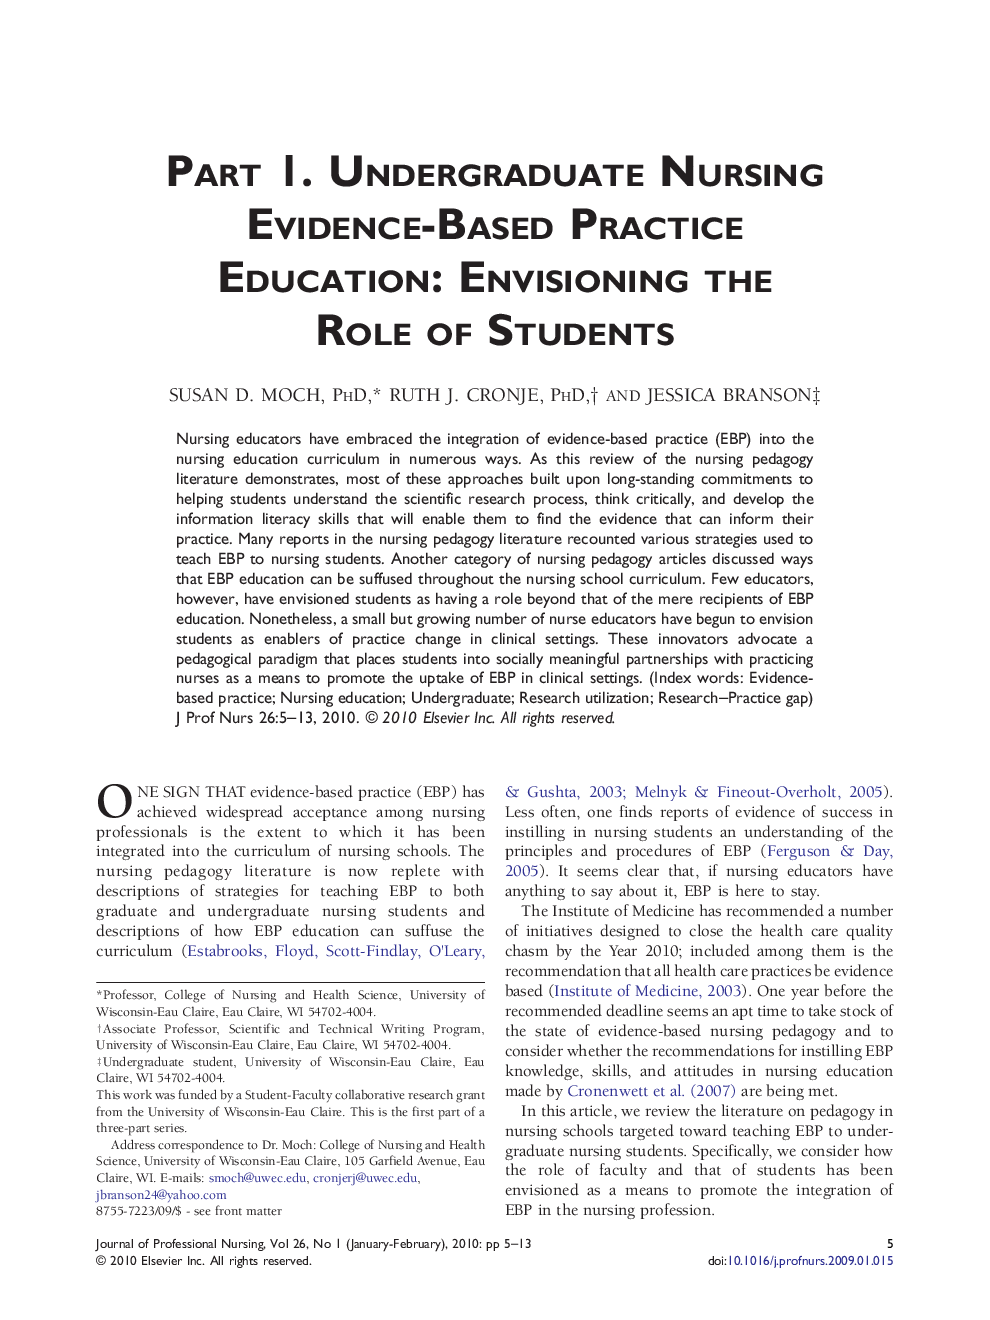 Part 1. Undergraduate Nursing Evidence-Based Practice Education: Envisioning the Role of Students 